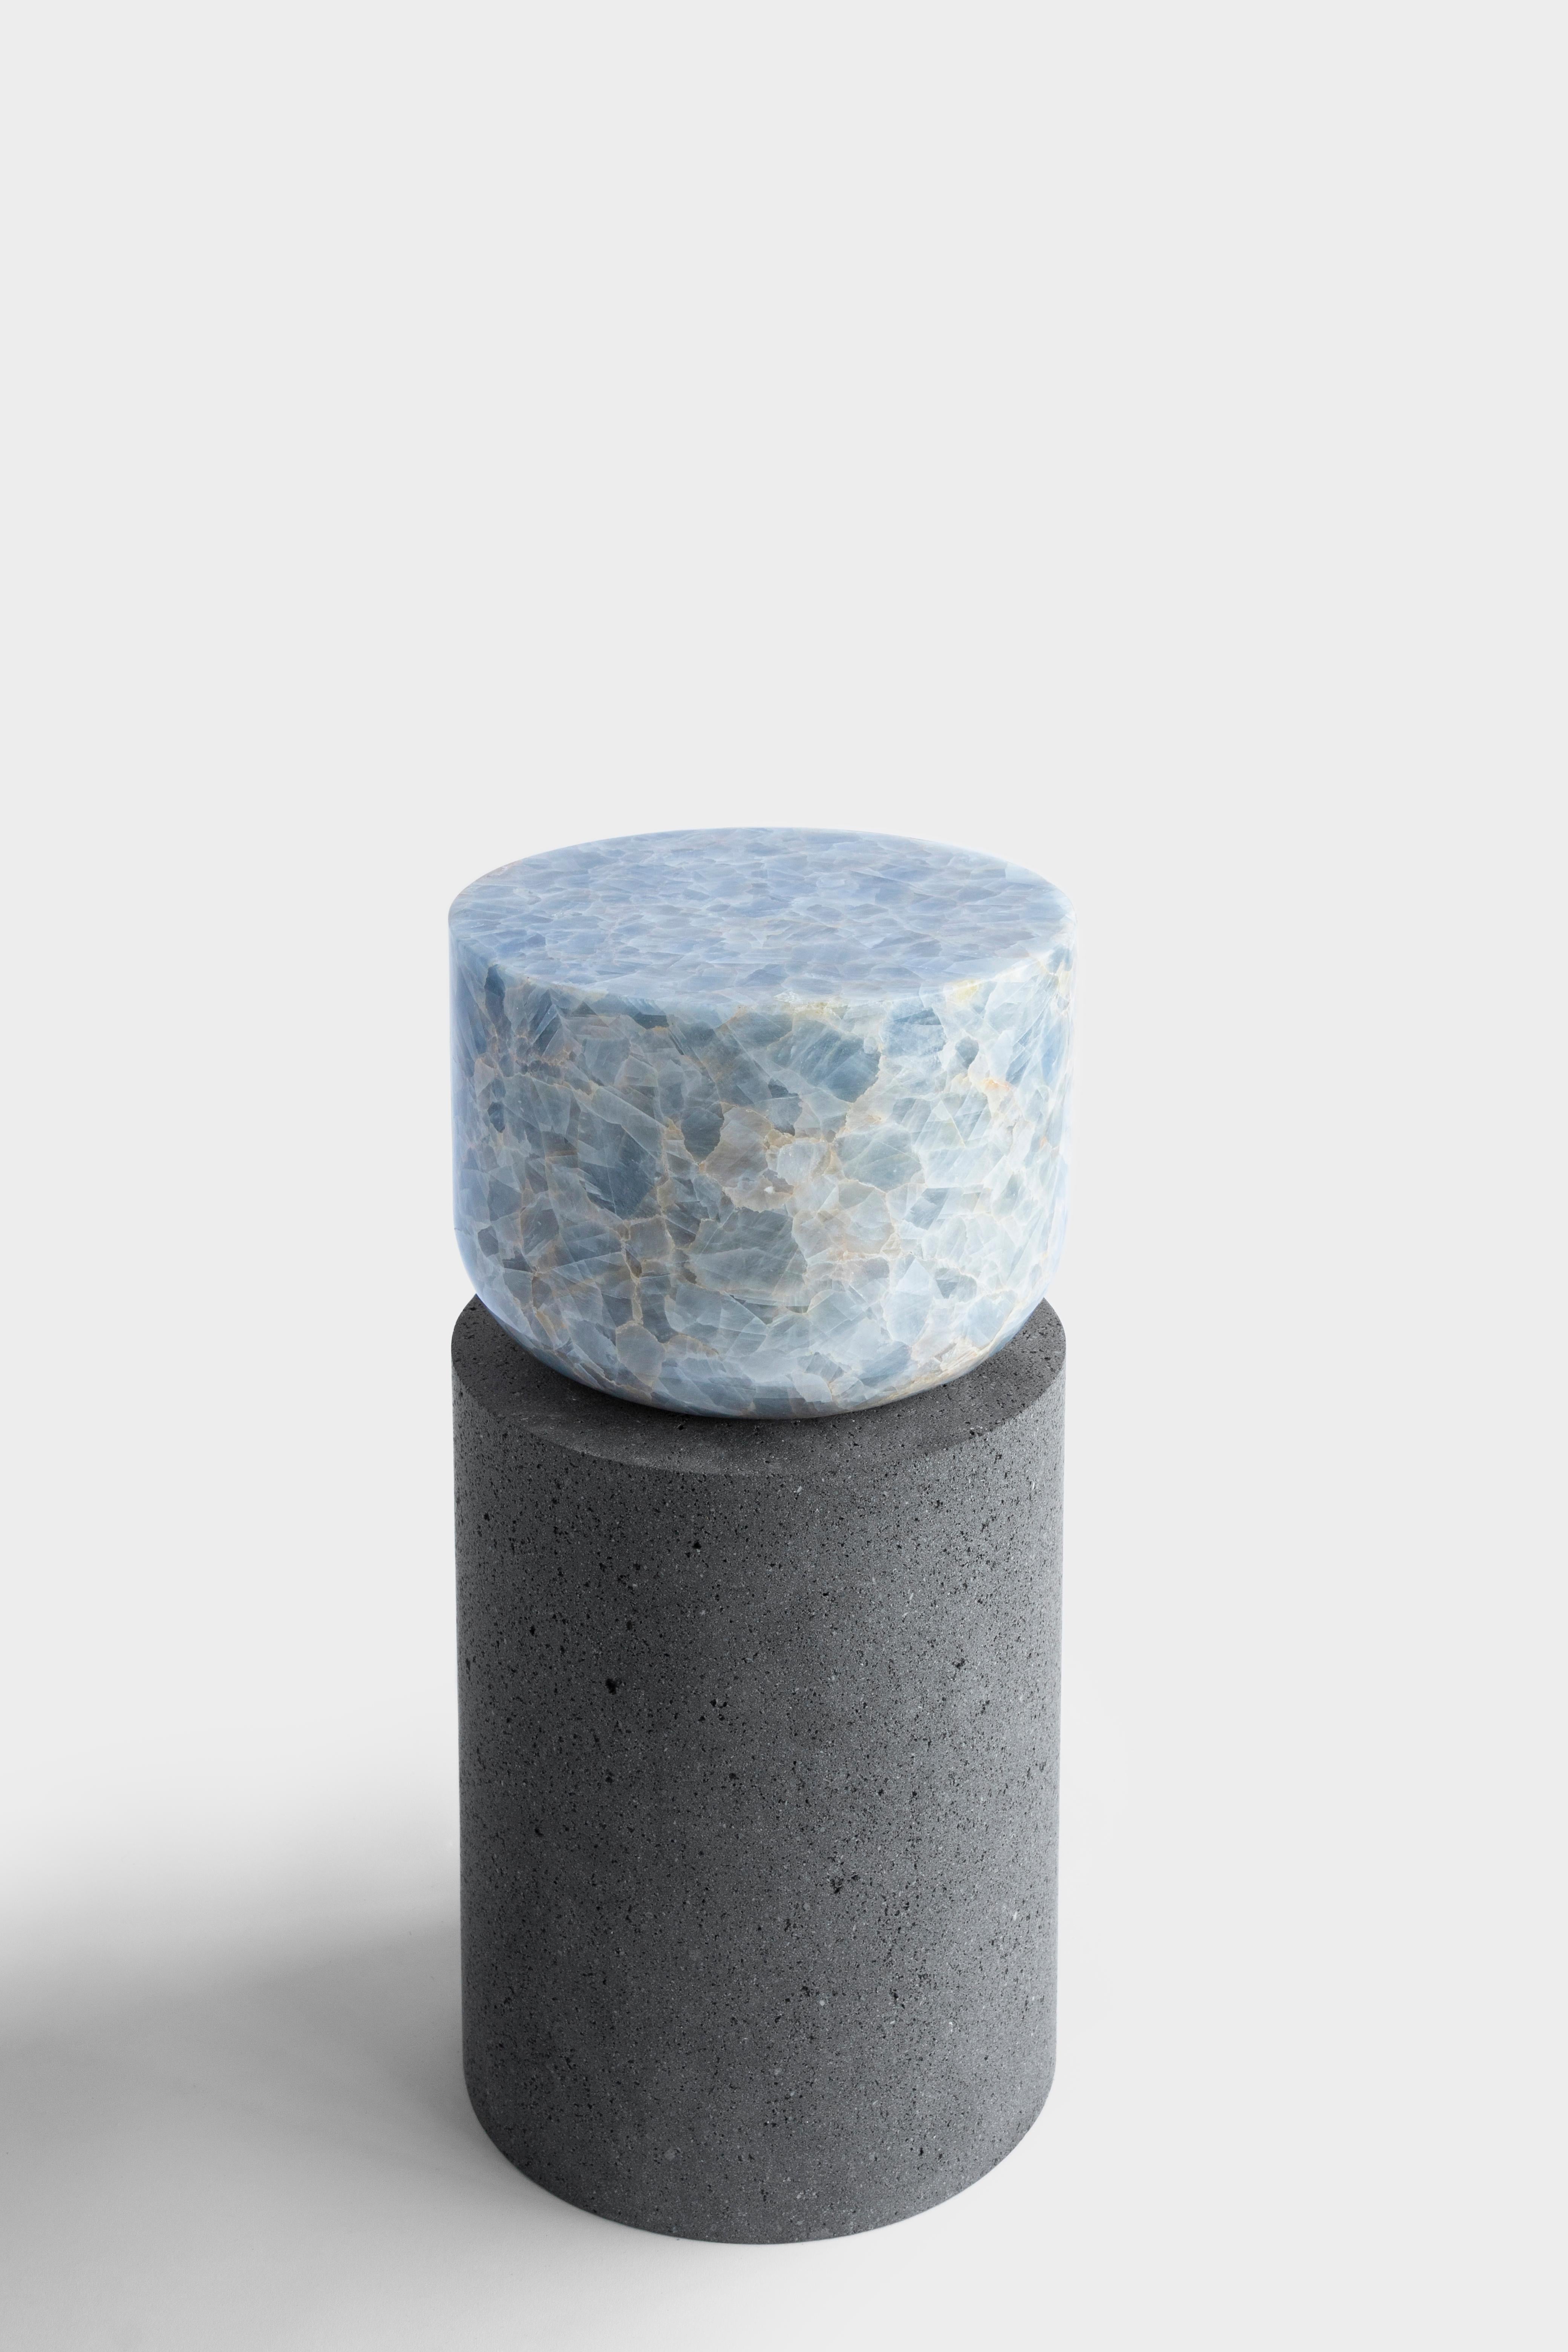 Stone Volcanic Shade V Stool/Table by Sten Studio, Represented by Tuleste Factory For Sale